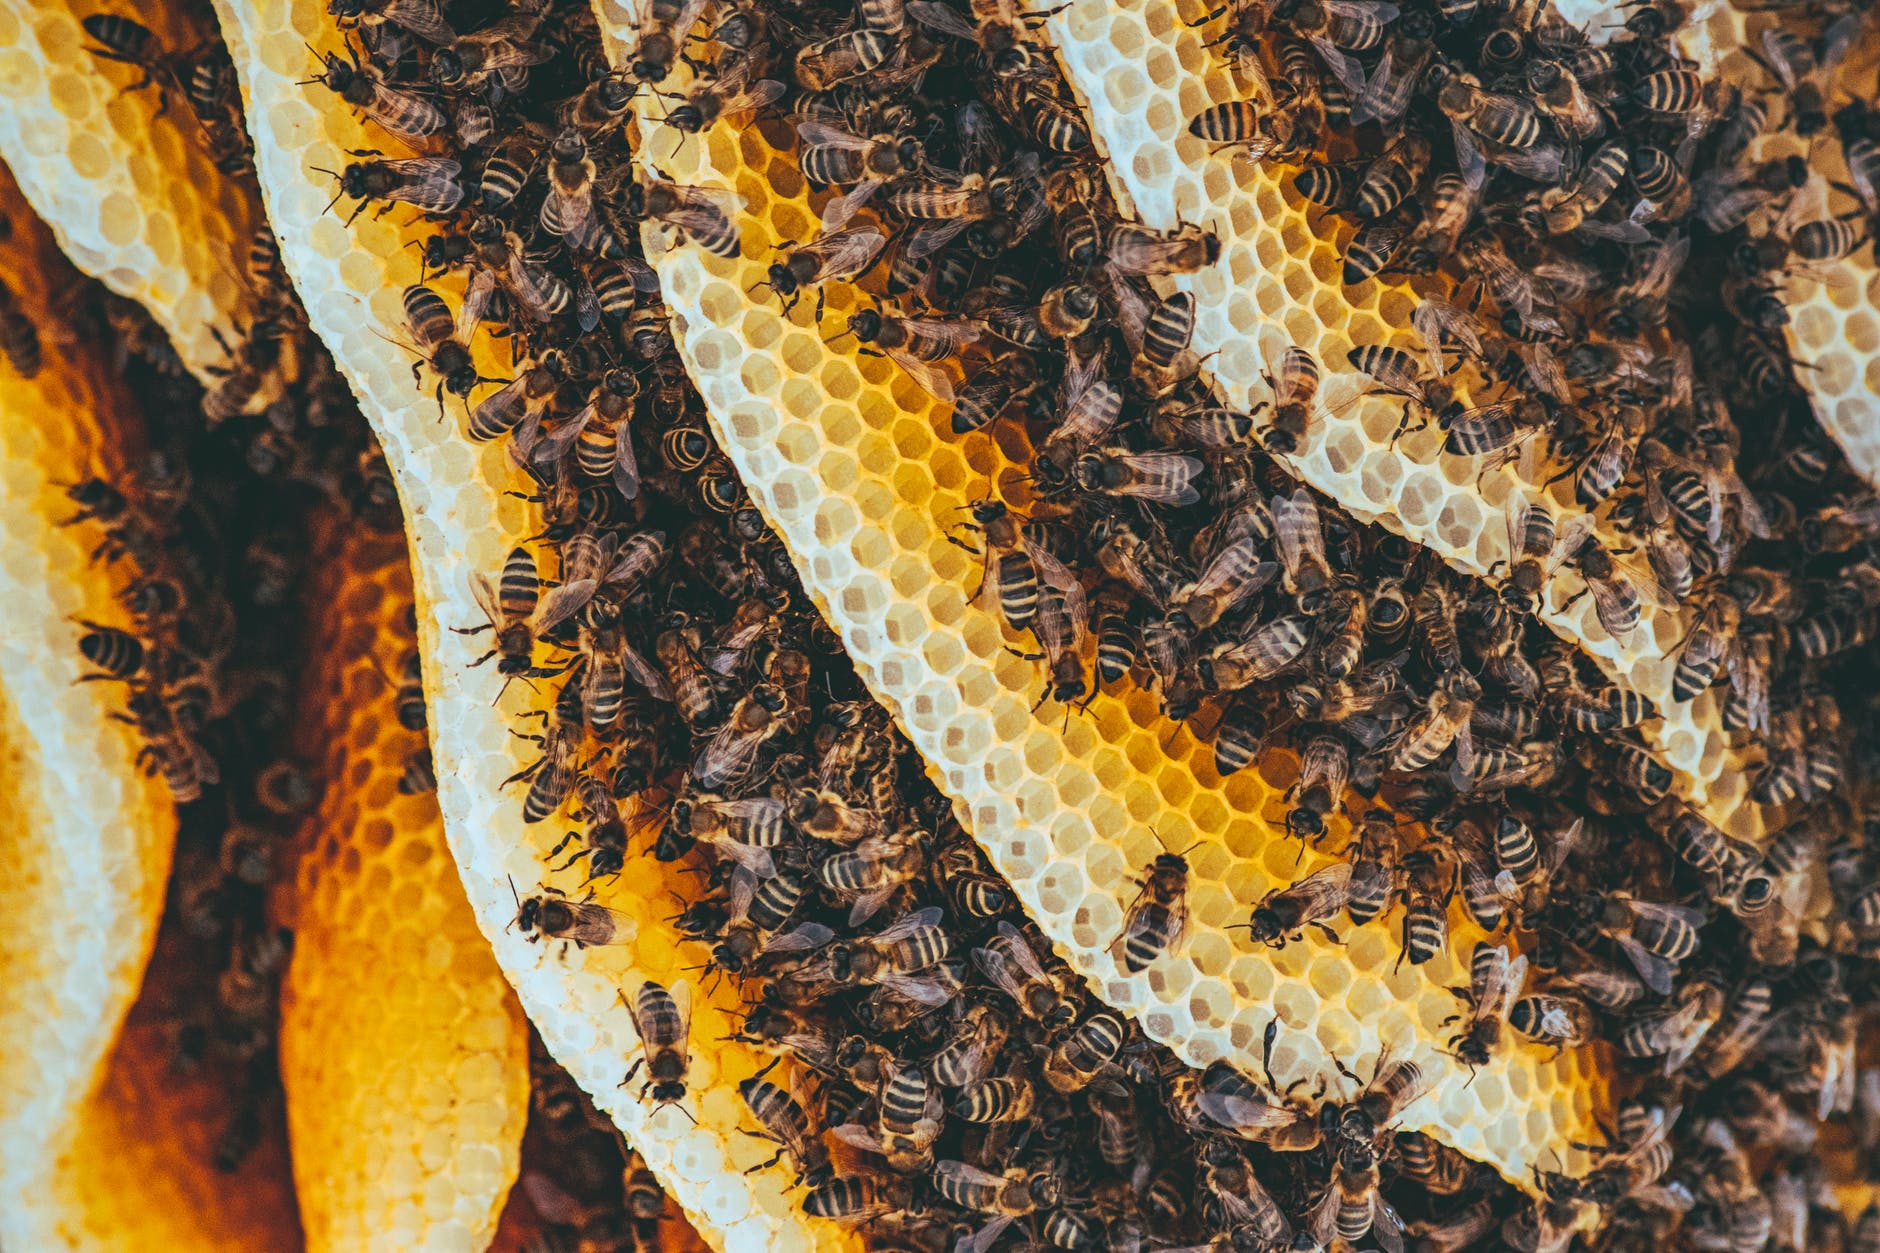 types of honey bees in a colony